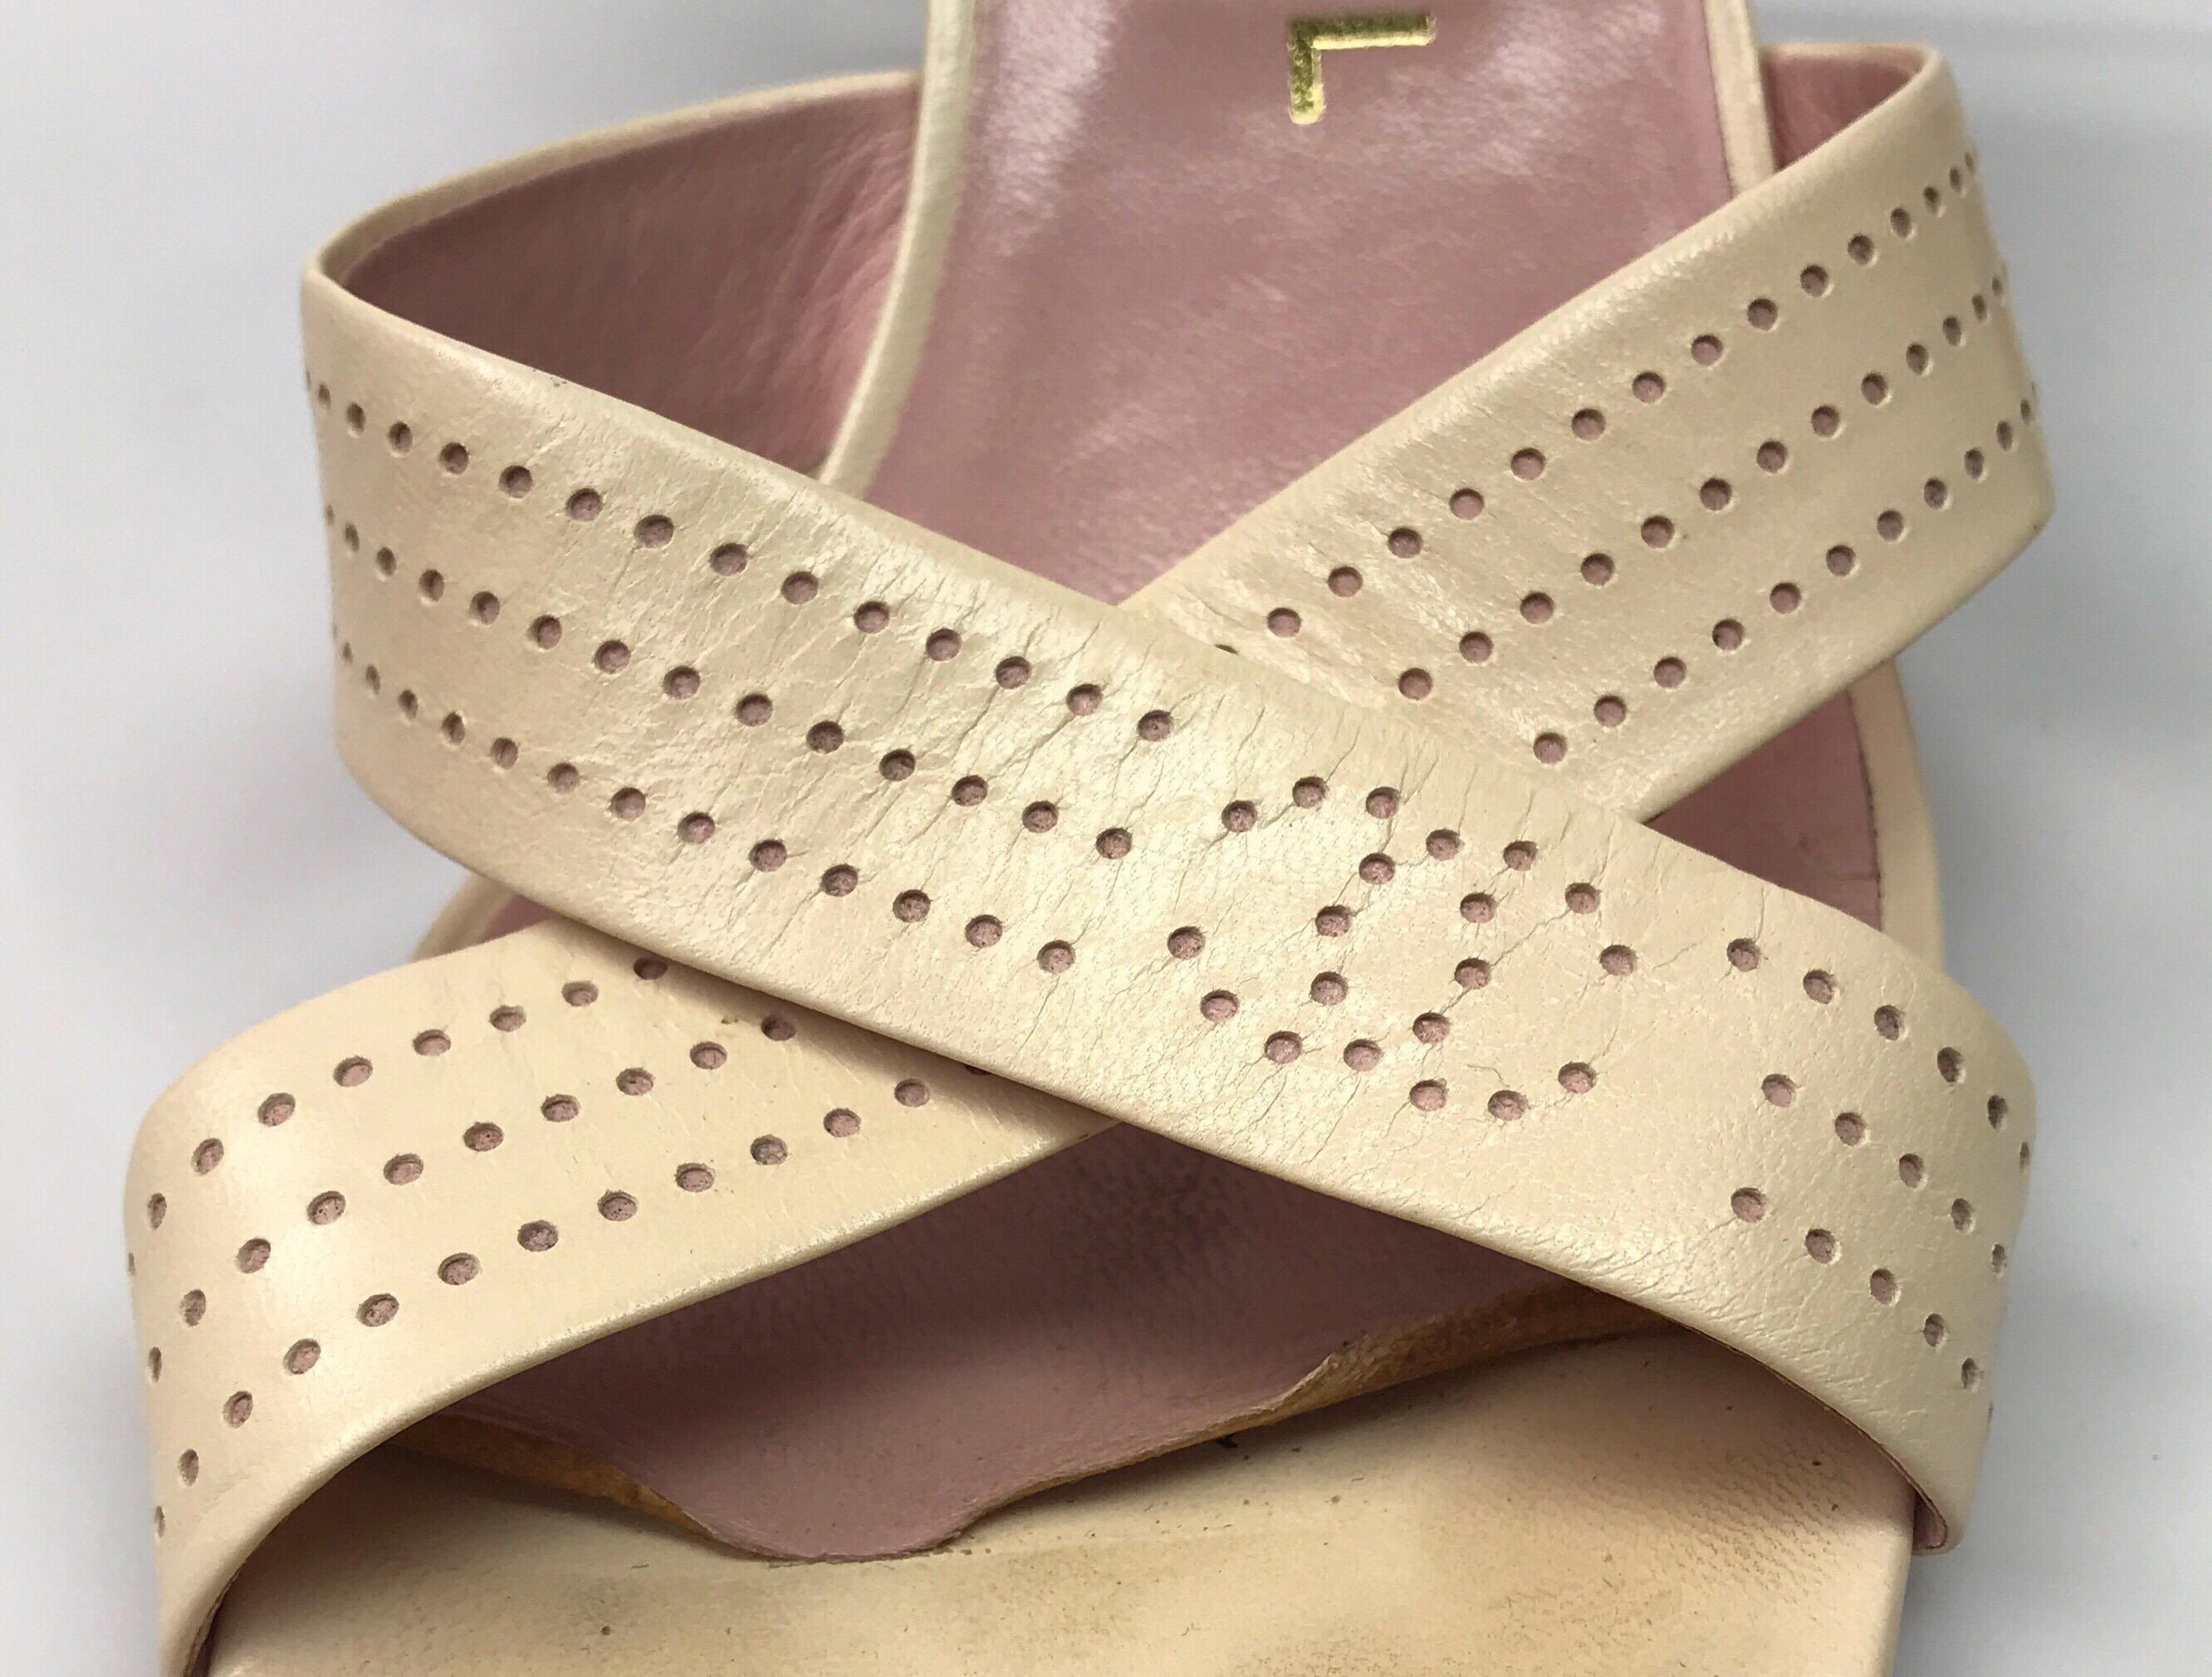 Women's Chanel Pale Pink Perforated Leather Strappy Sandal - 37